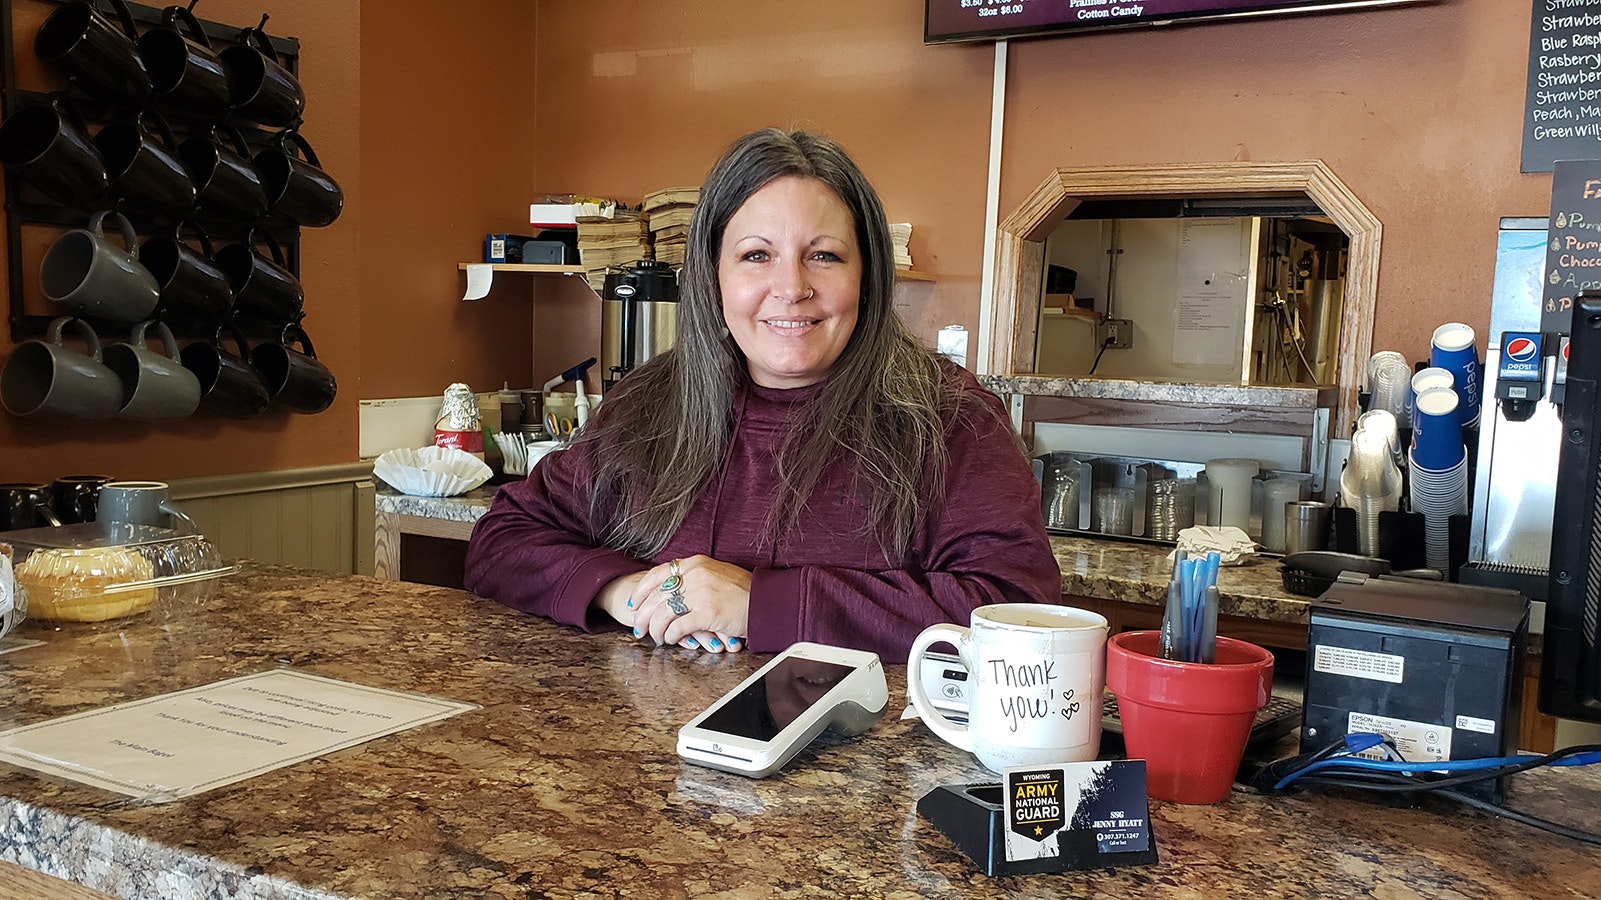 Amber Sims, a barista at The Main Bagel, told Cowboy State Daily said there haven't been any ghostly things happen that she knows of at the Gillette business.